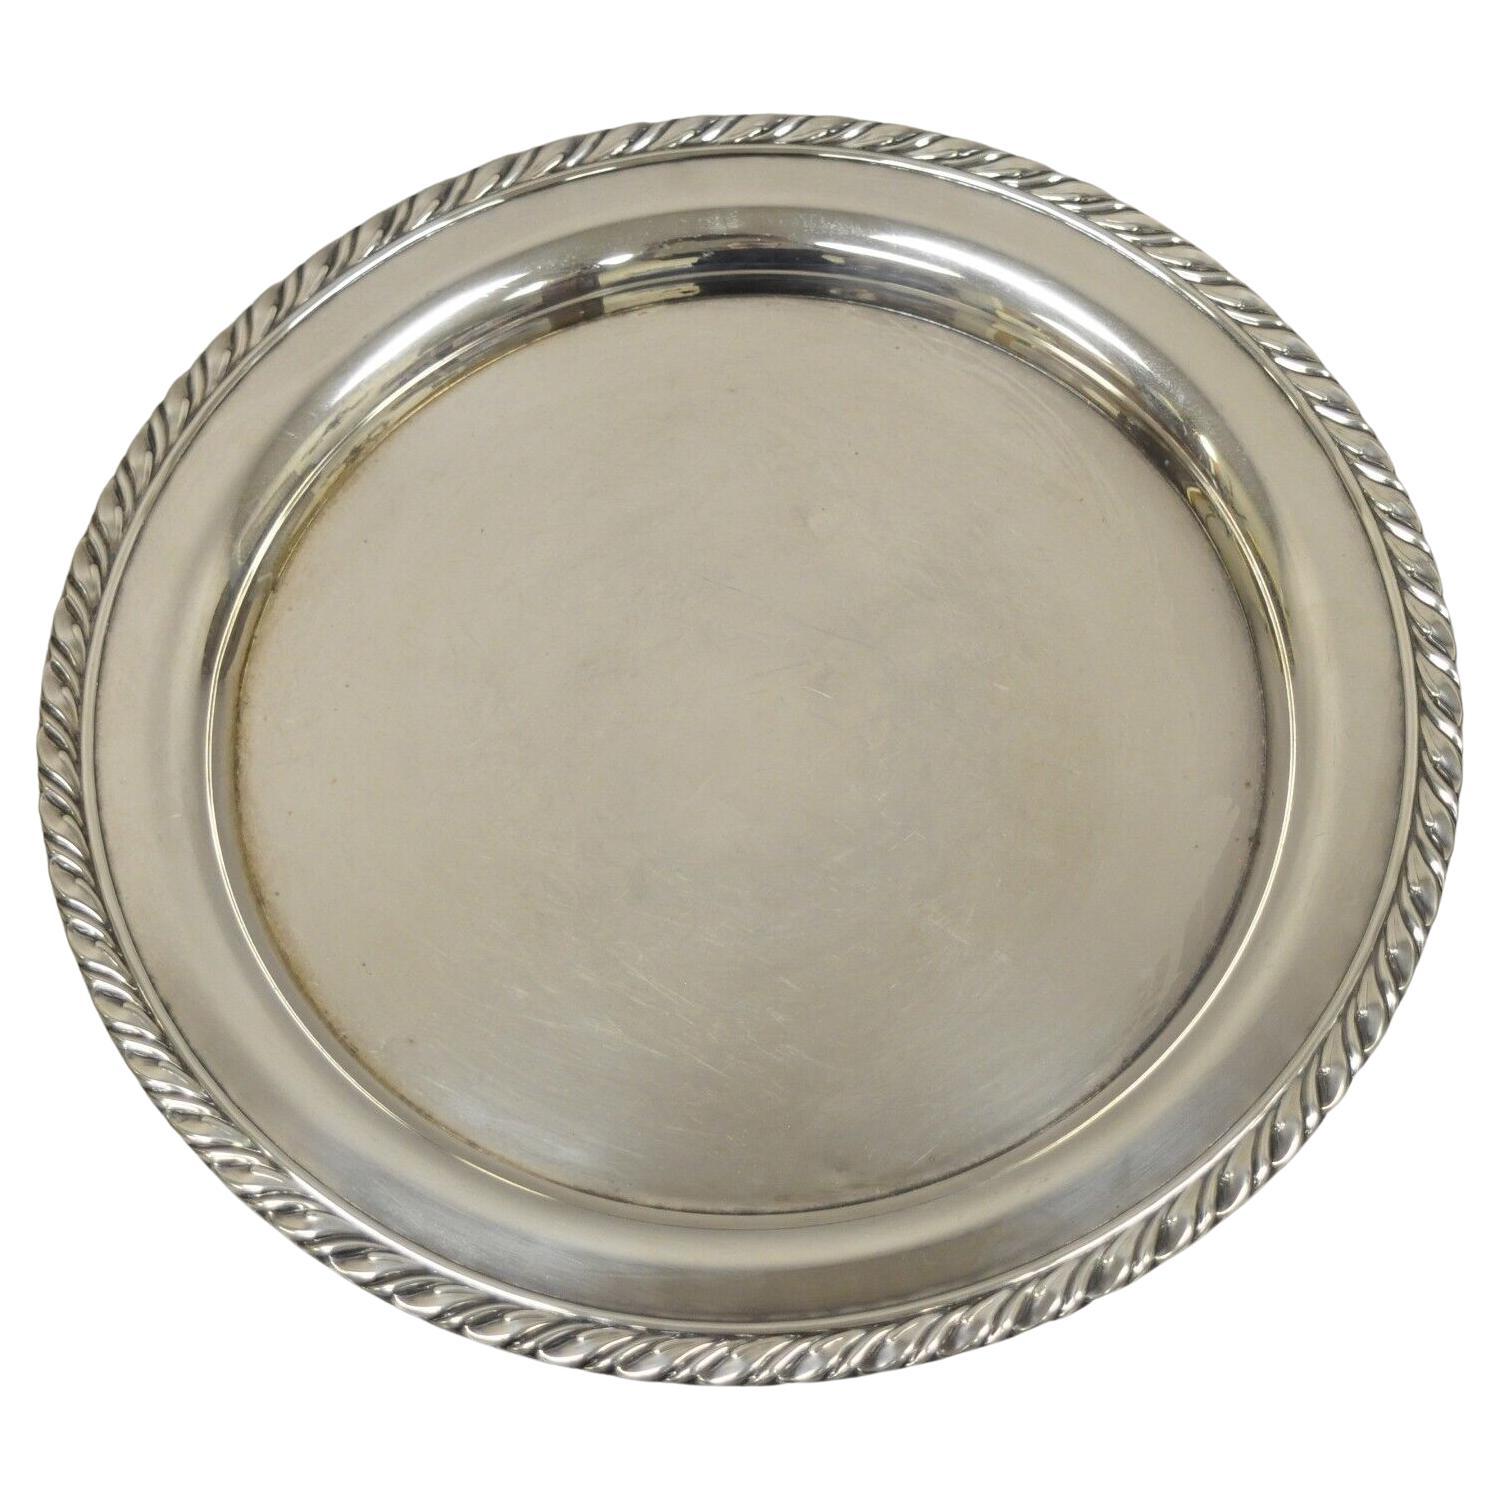 Vintage Oneida Round Silver Plate Serving Tray Platter Dish